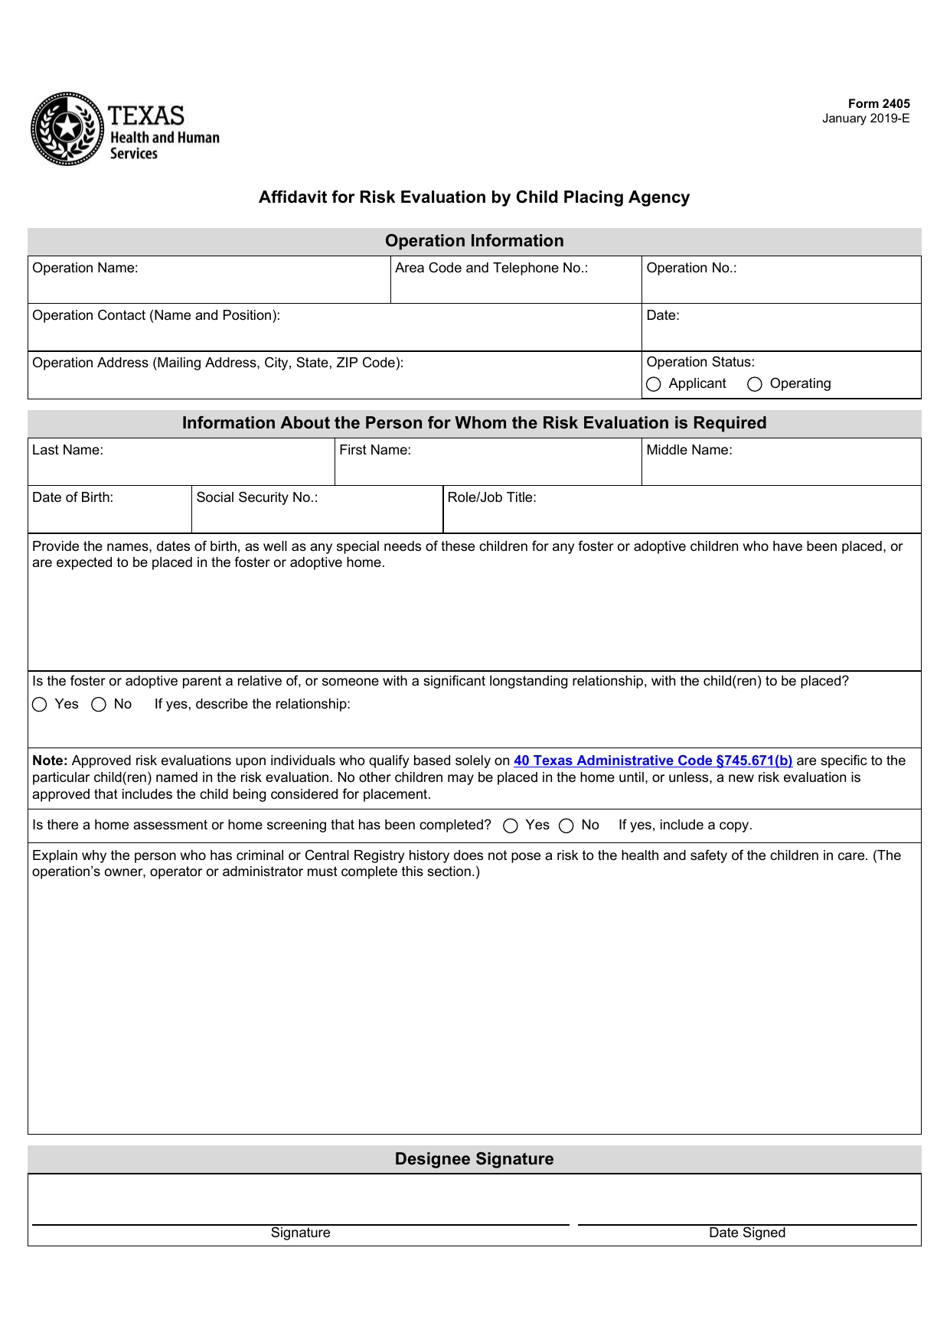 Form 2405 Affidavit for Risk Evaluation by Child Placing Agency - Texas, Page 1